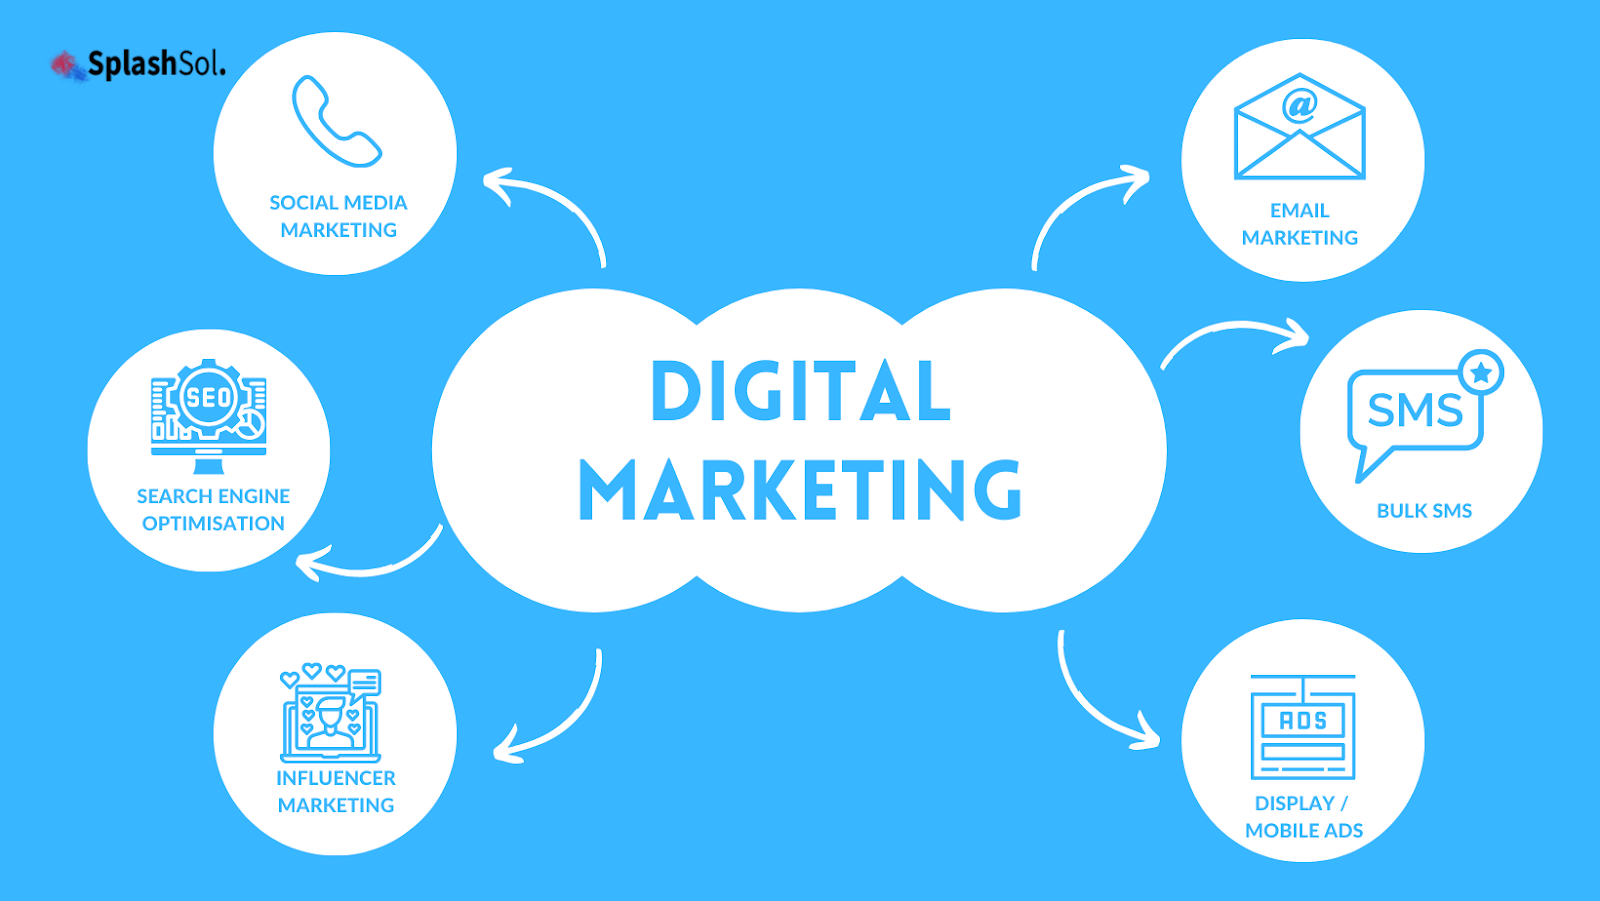 Digital Marketing Important For Small Businesses